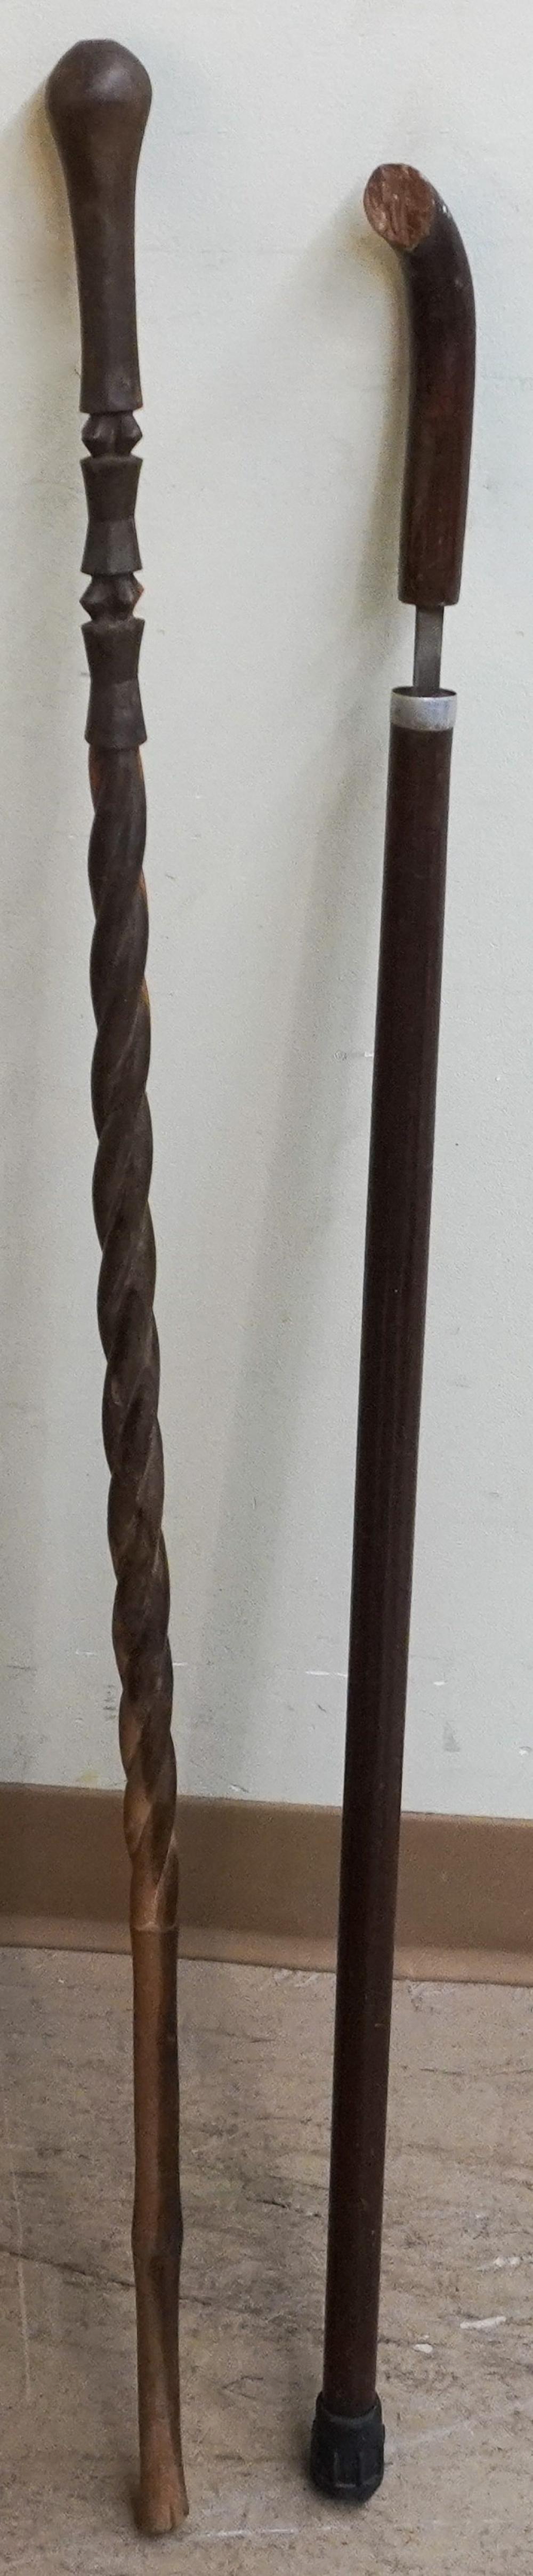 TWO CARVED WOOD CANES ONE WITH 2e5dcb